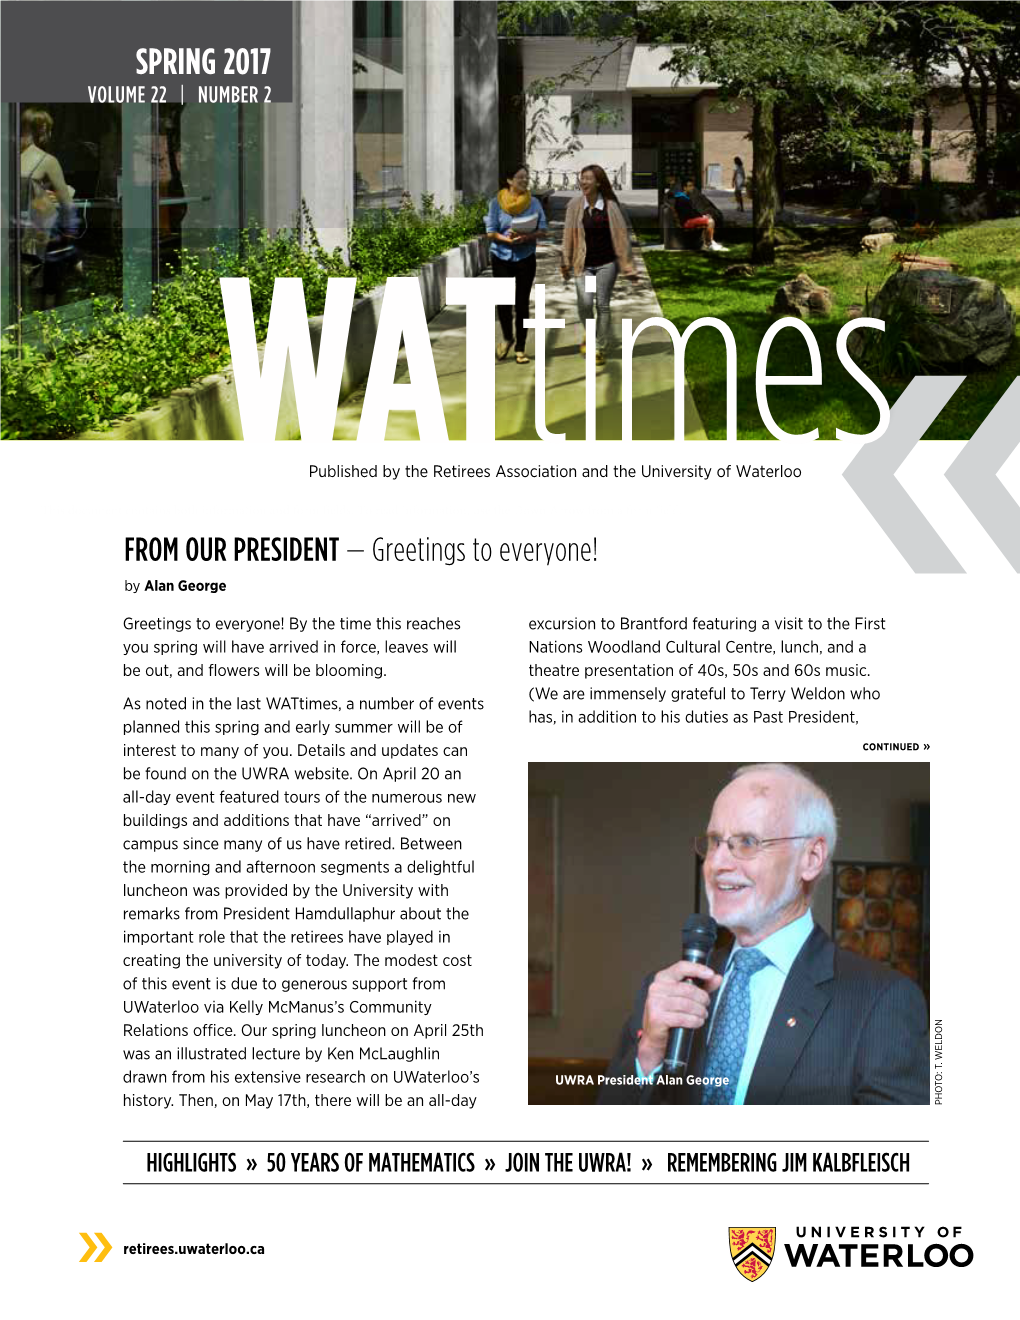 Wattimes, a Number of Events Has, in Addition to His Duties As Past President, Planned This Spring and Early Summer Will Be of Interest to Many of You